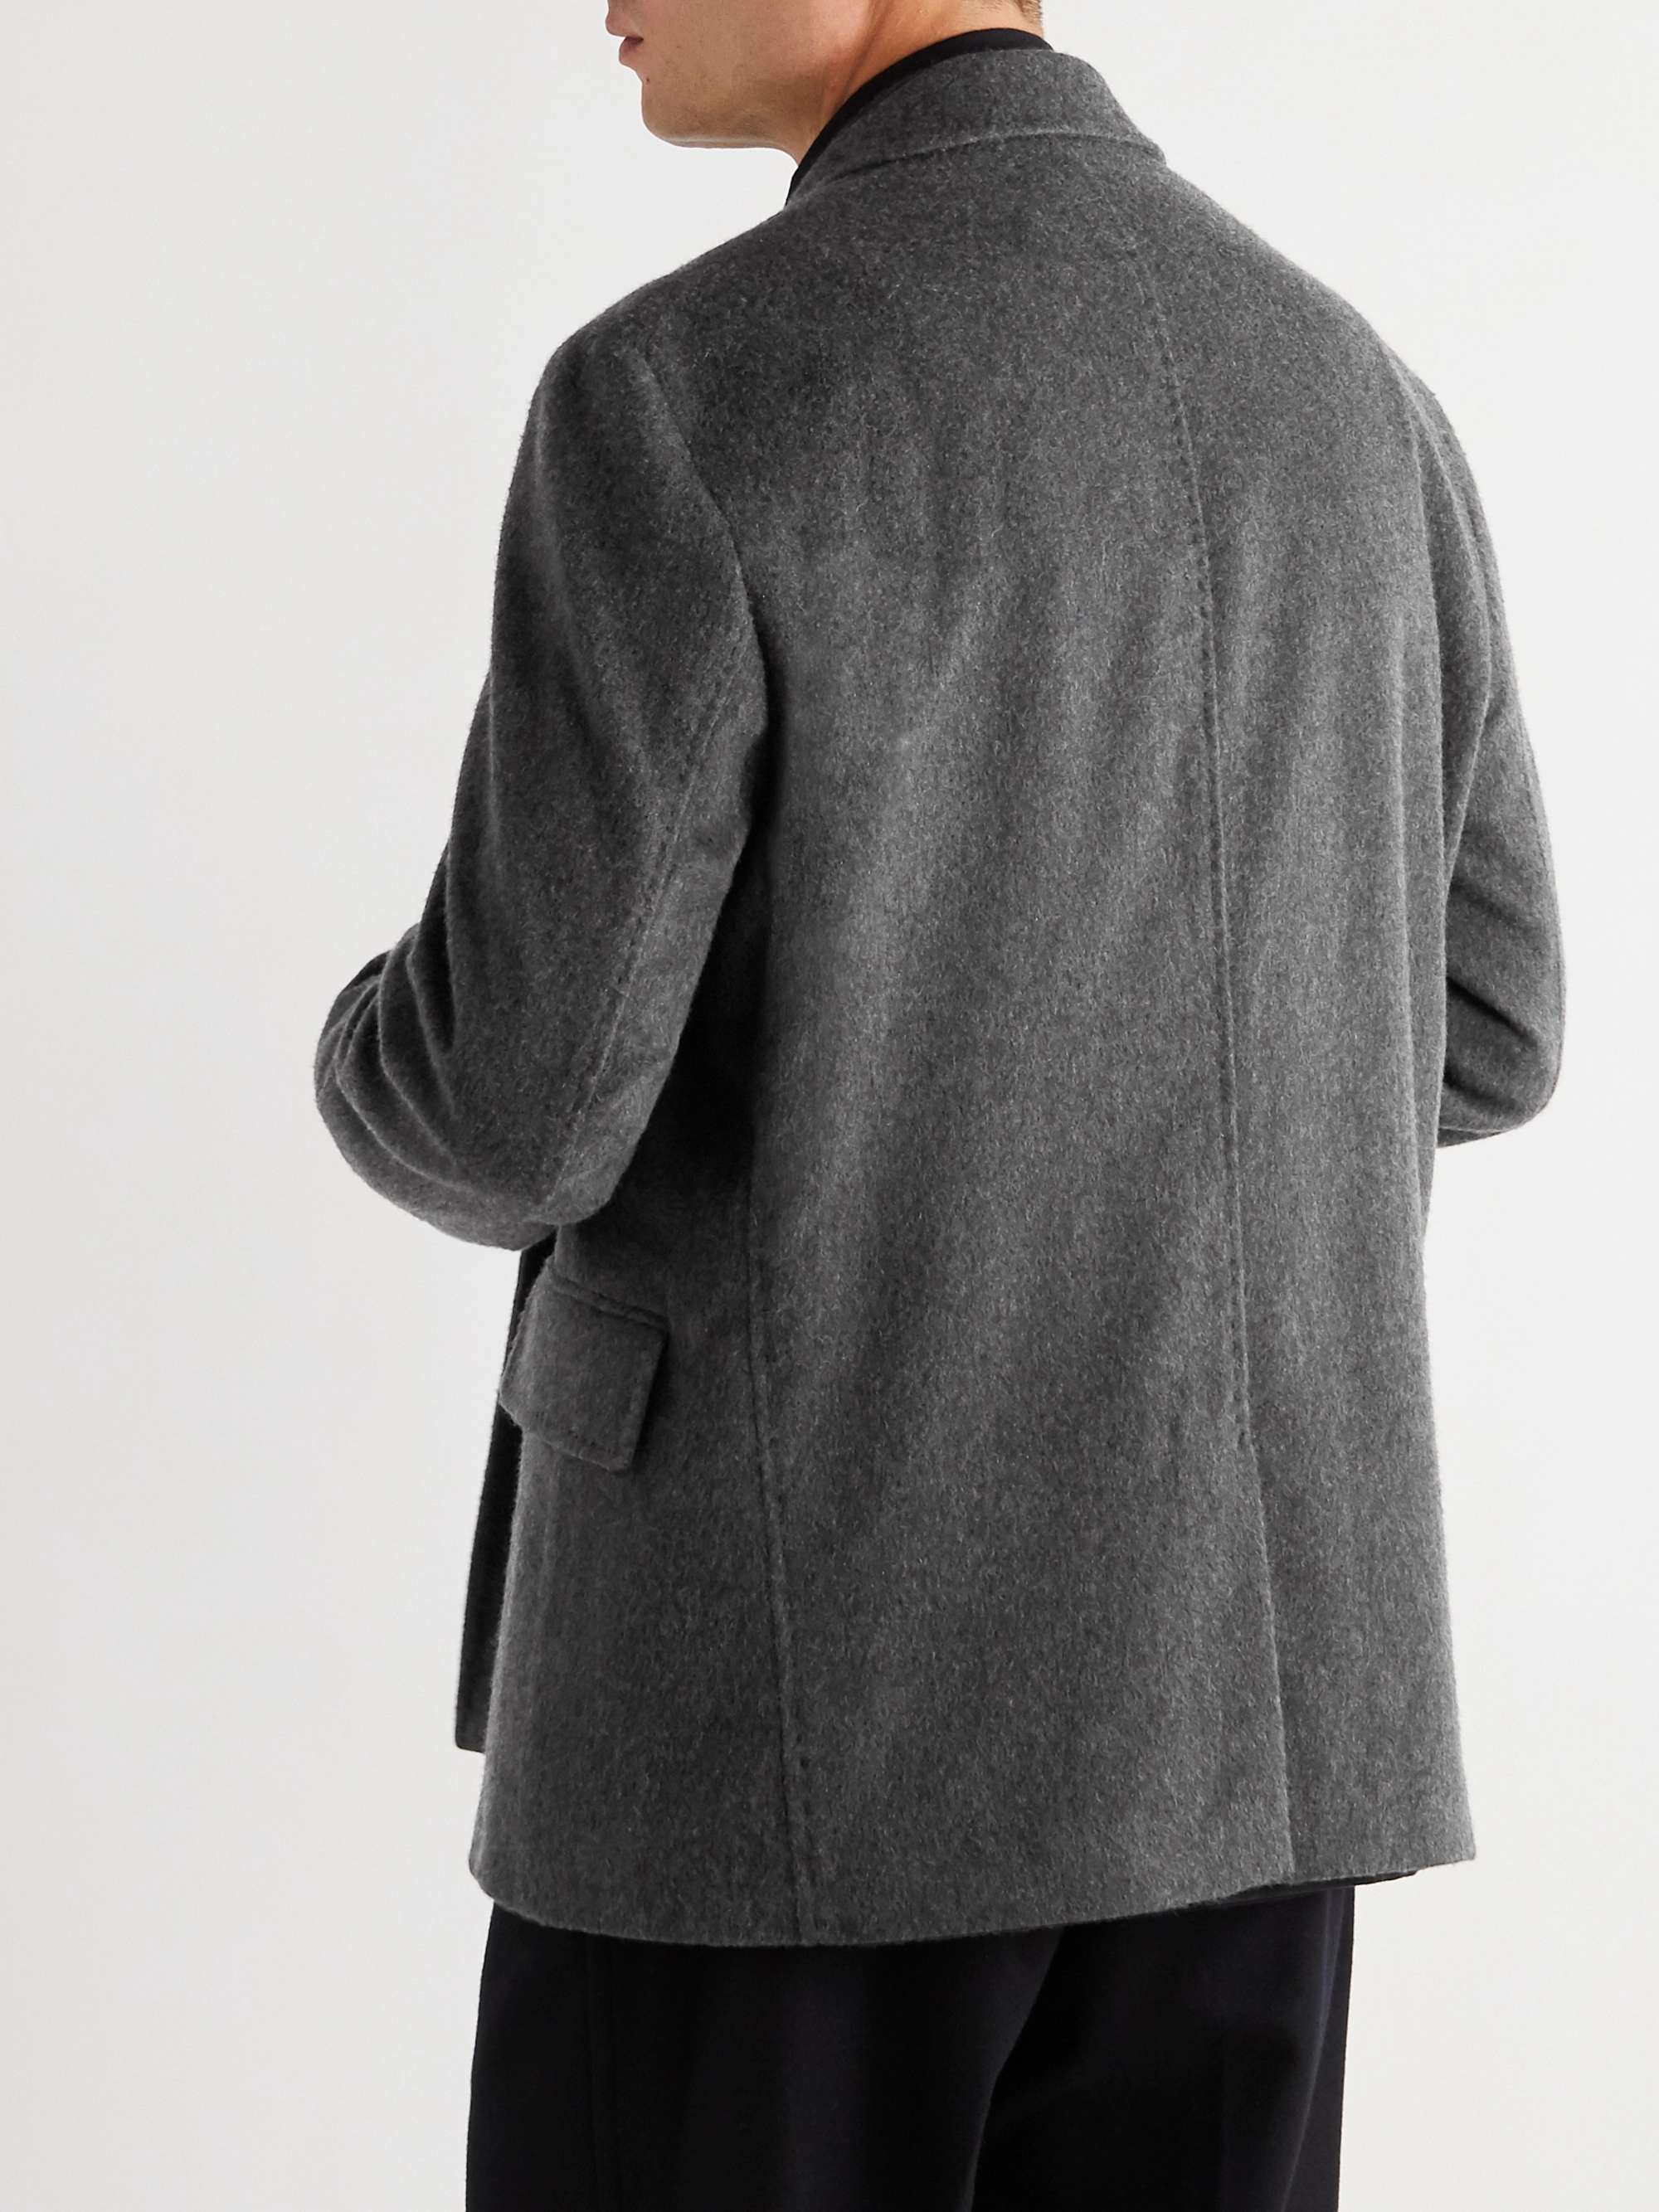 MR P. Double-Breasted Unstructured Cashmere Blazer